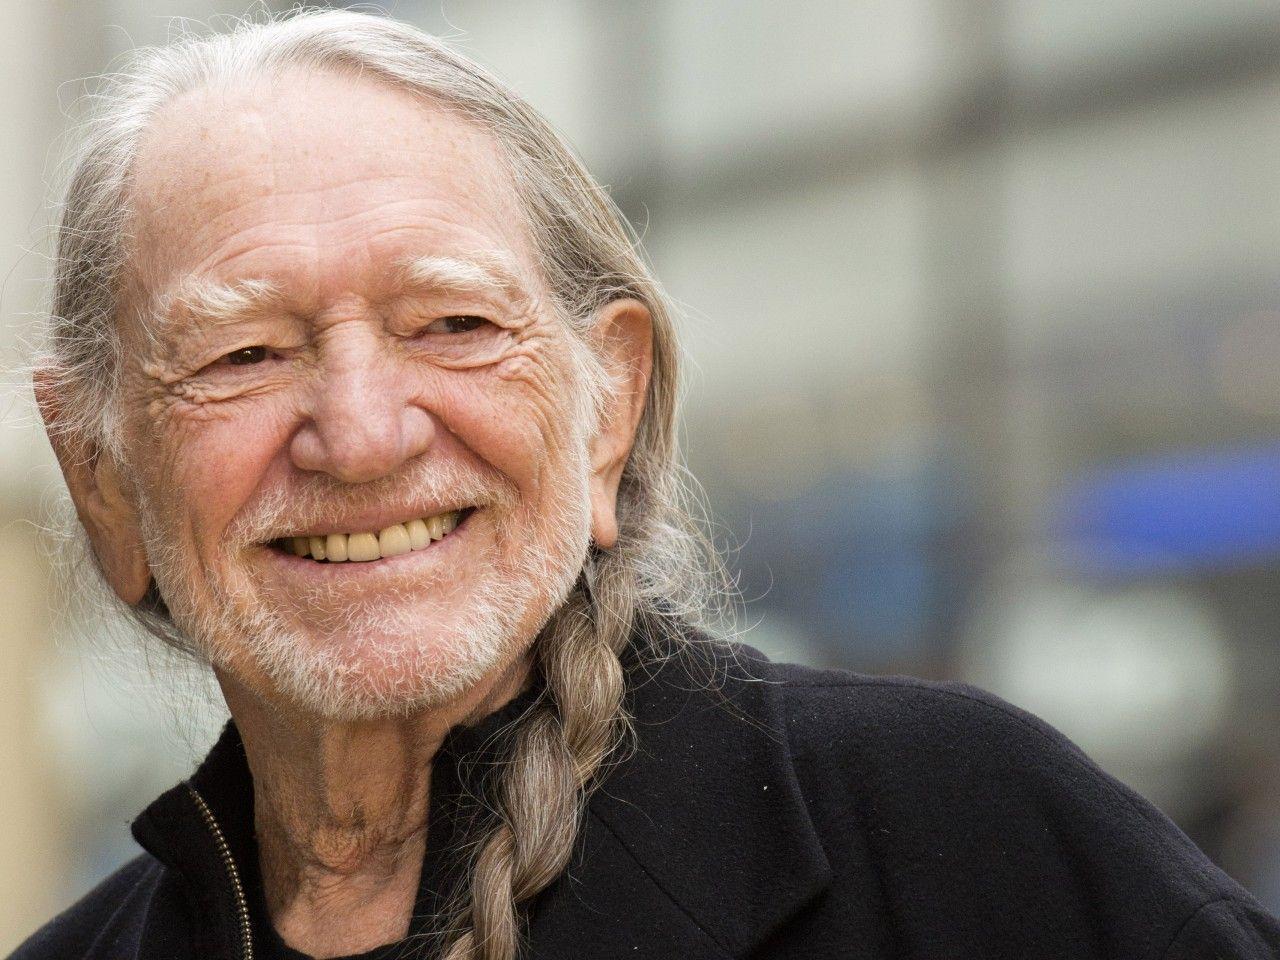 Willie Nelson Death Hoax is a Hoax